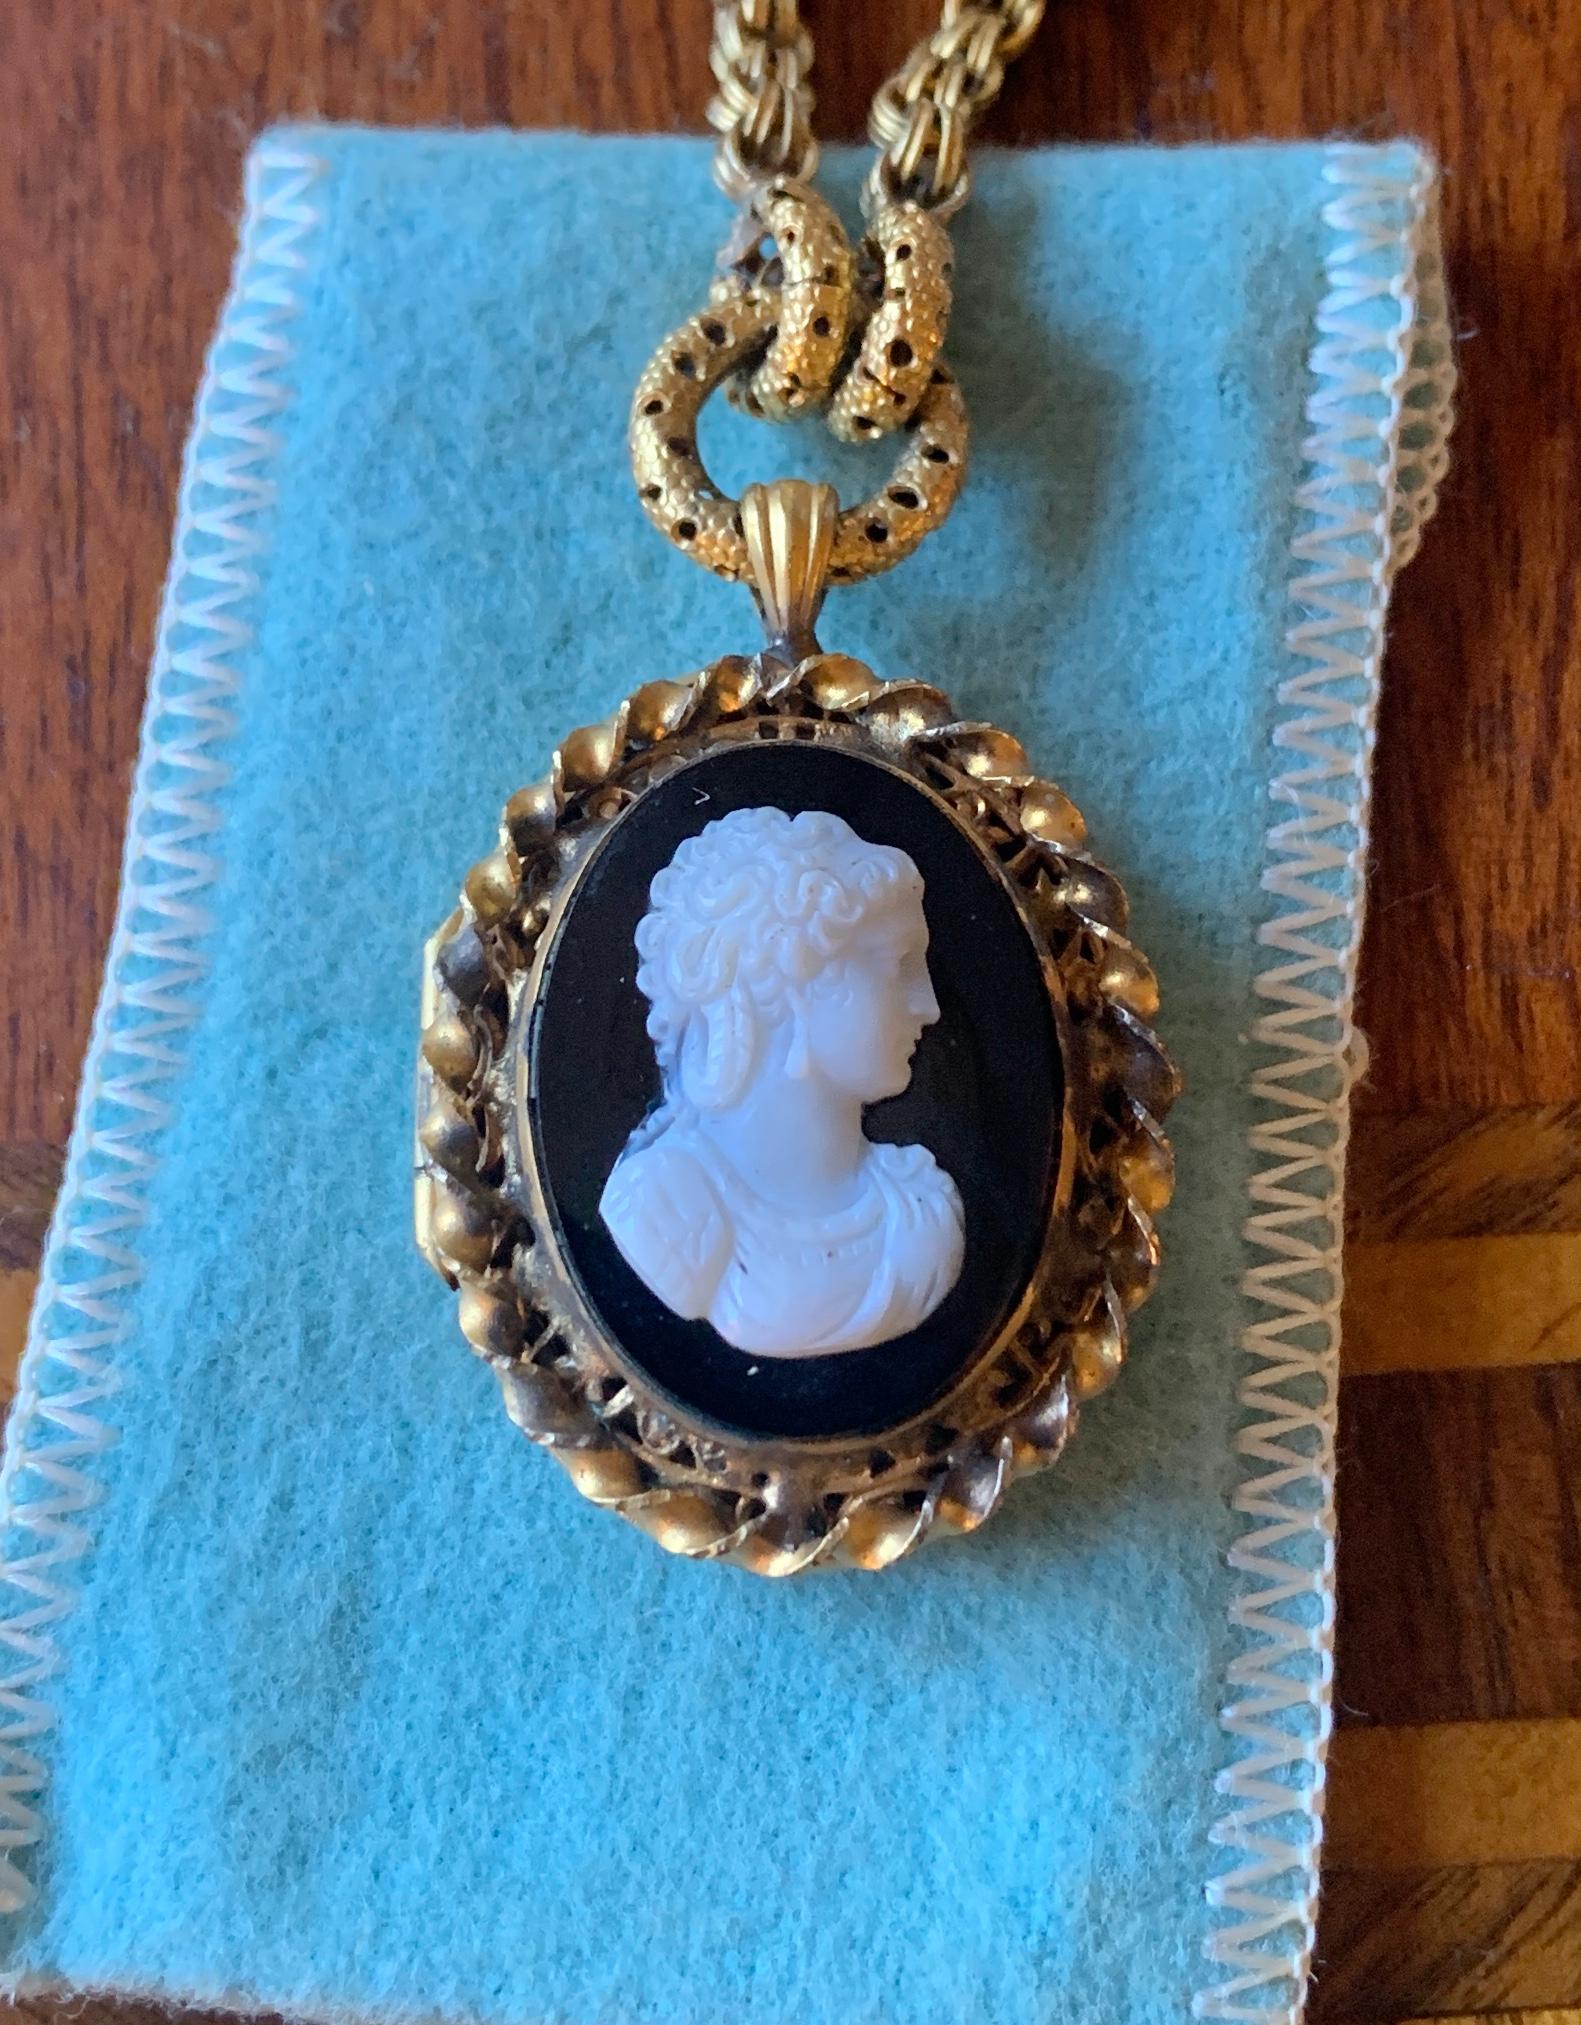 THIS IS A SUPERB VICTORIAN PICTURE LOCKET NECKLACE WITH A HAND CARVED HARDSTONE CAMEO OF A BEAUTIFUL WOMAN.  THE LOCKET HANGS FROM A WONDERFUL BOOK BELCHER CHAIN.  THE NECKLACE DATES TO C1860-1890.
The locket features a stunning hard stone hand